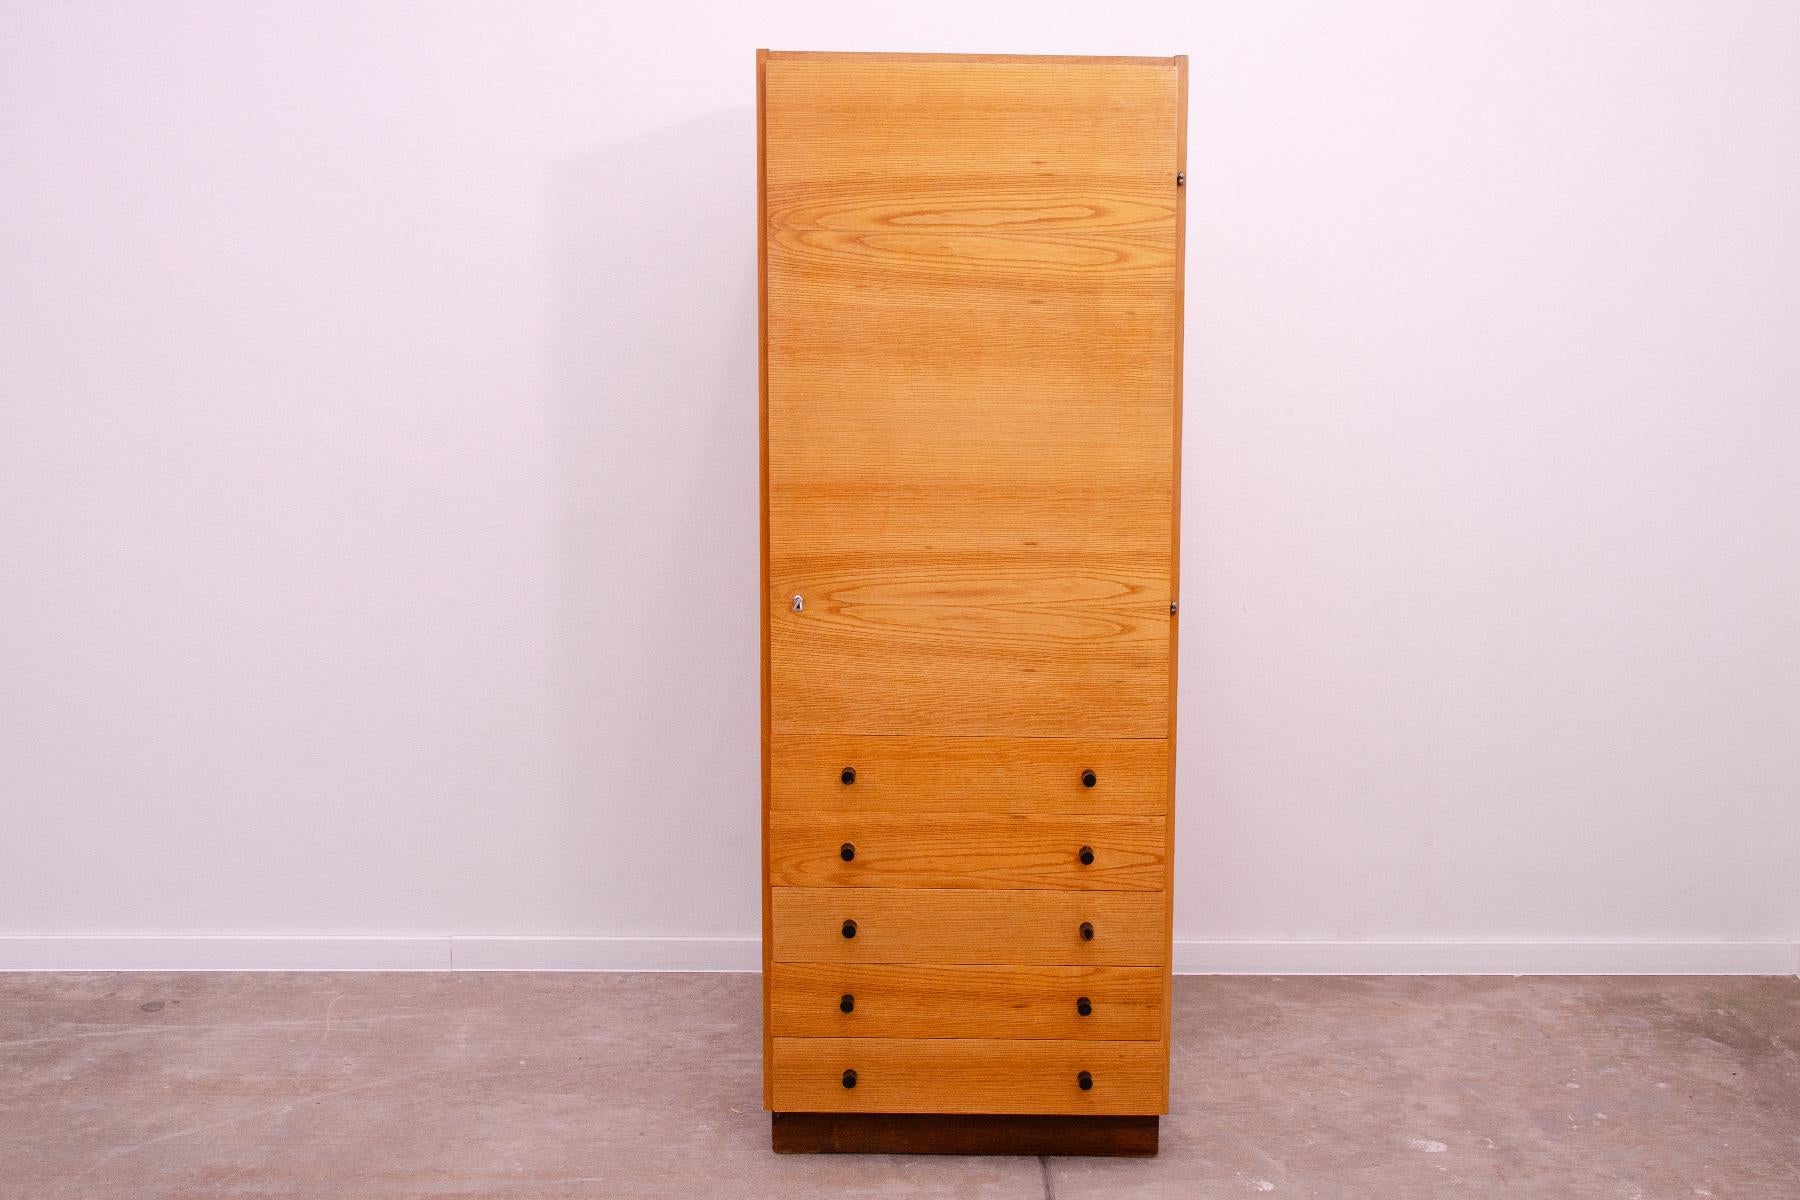 Multi-purpose cabinet or chest of drawers, designed by Mojmír Požár for ÚP Závody in the 1960s.  Made in a combination of ash, elm, maple, walnut, birch and poplar wood.  It´s in good Vintage condition, shows slight signs of age and using.

Height: 